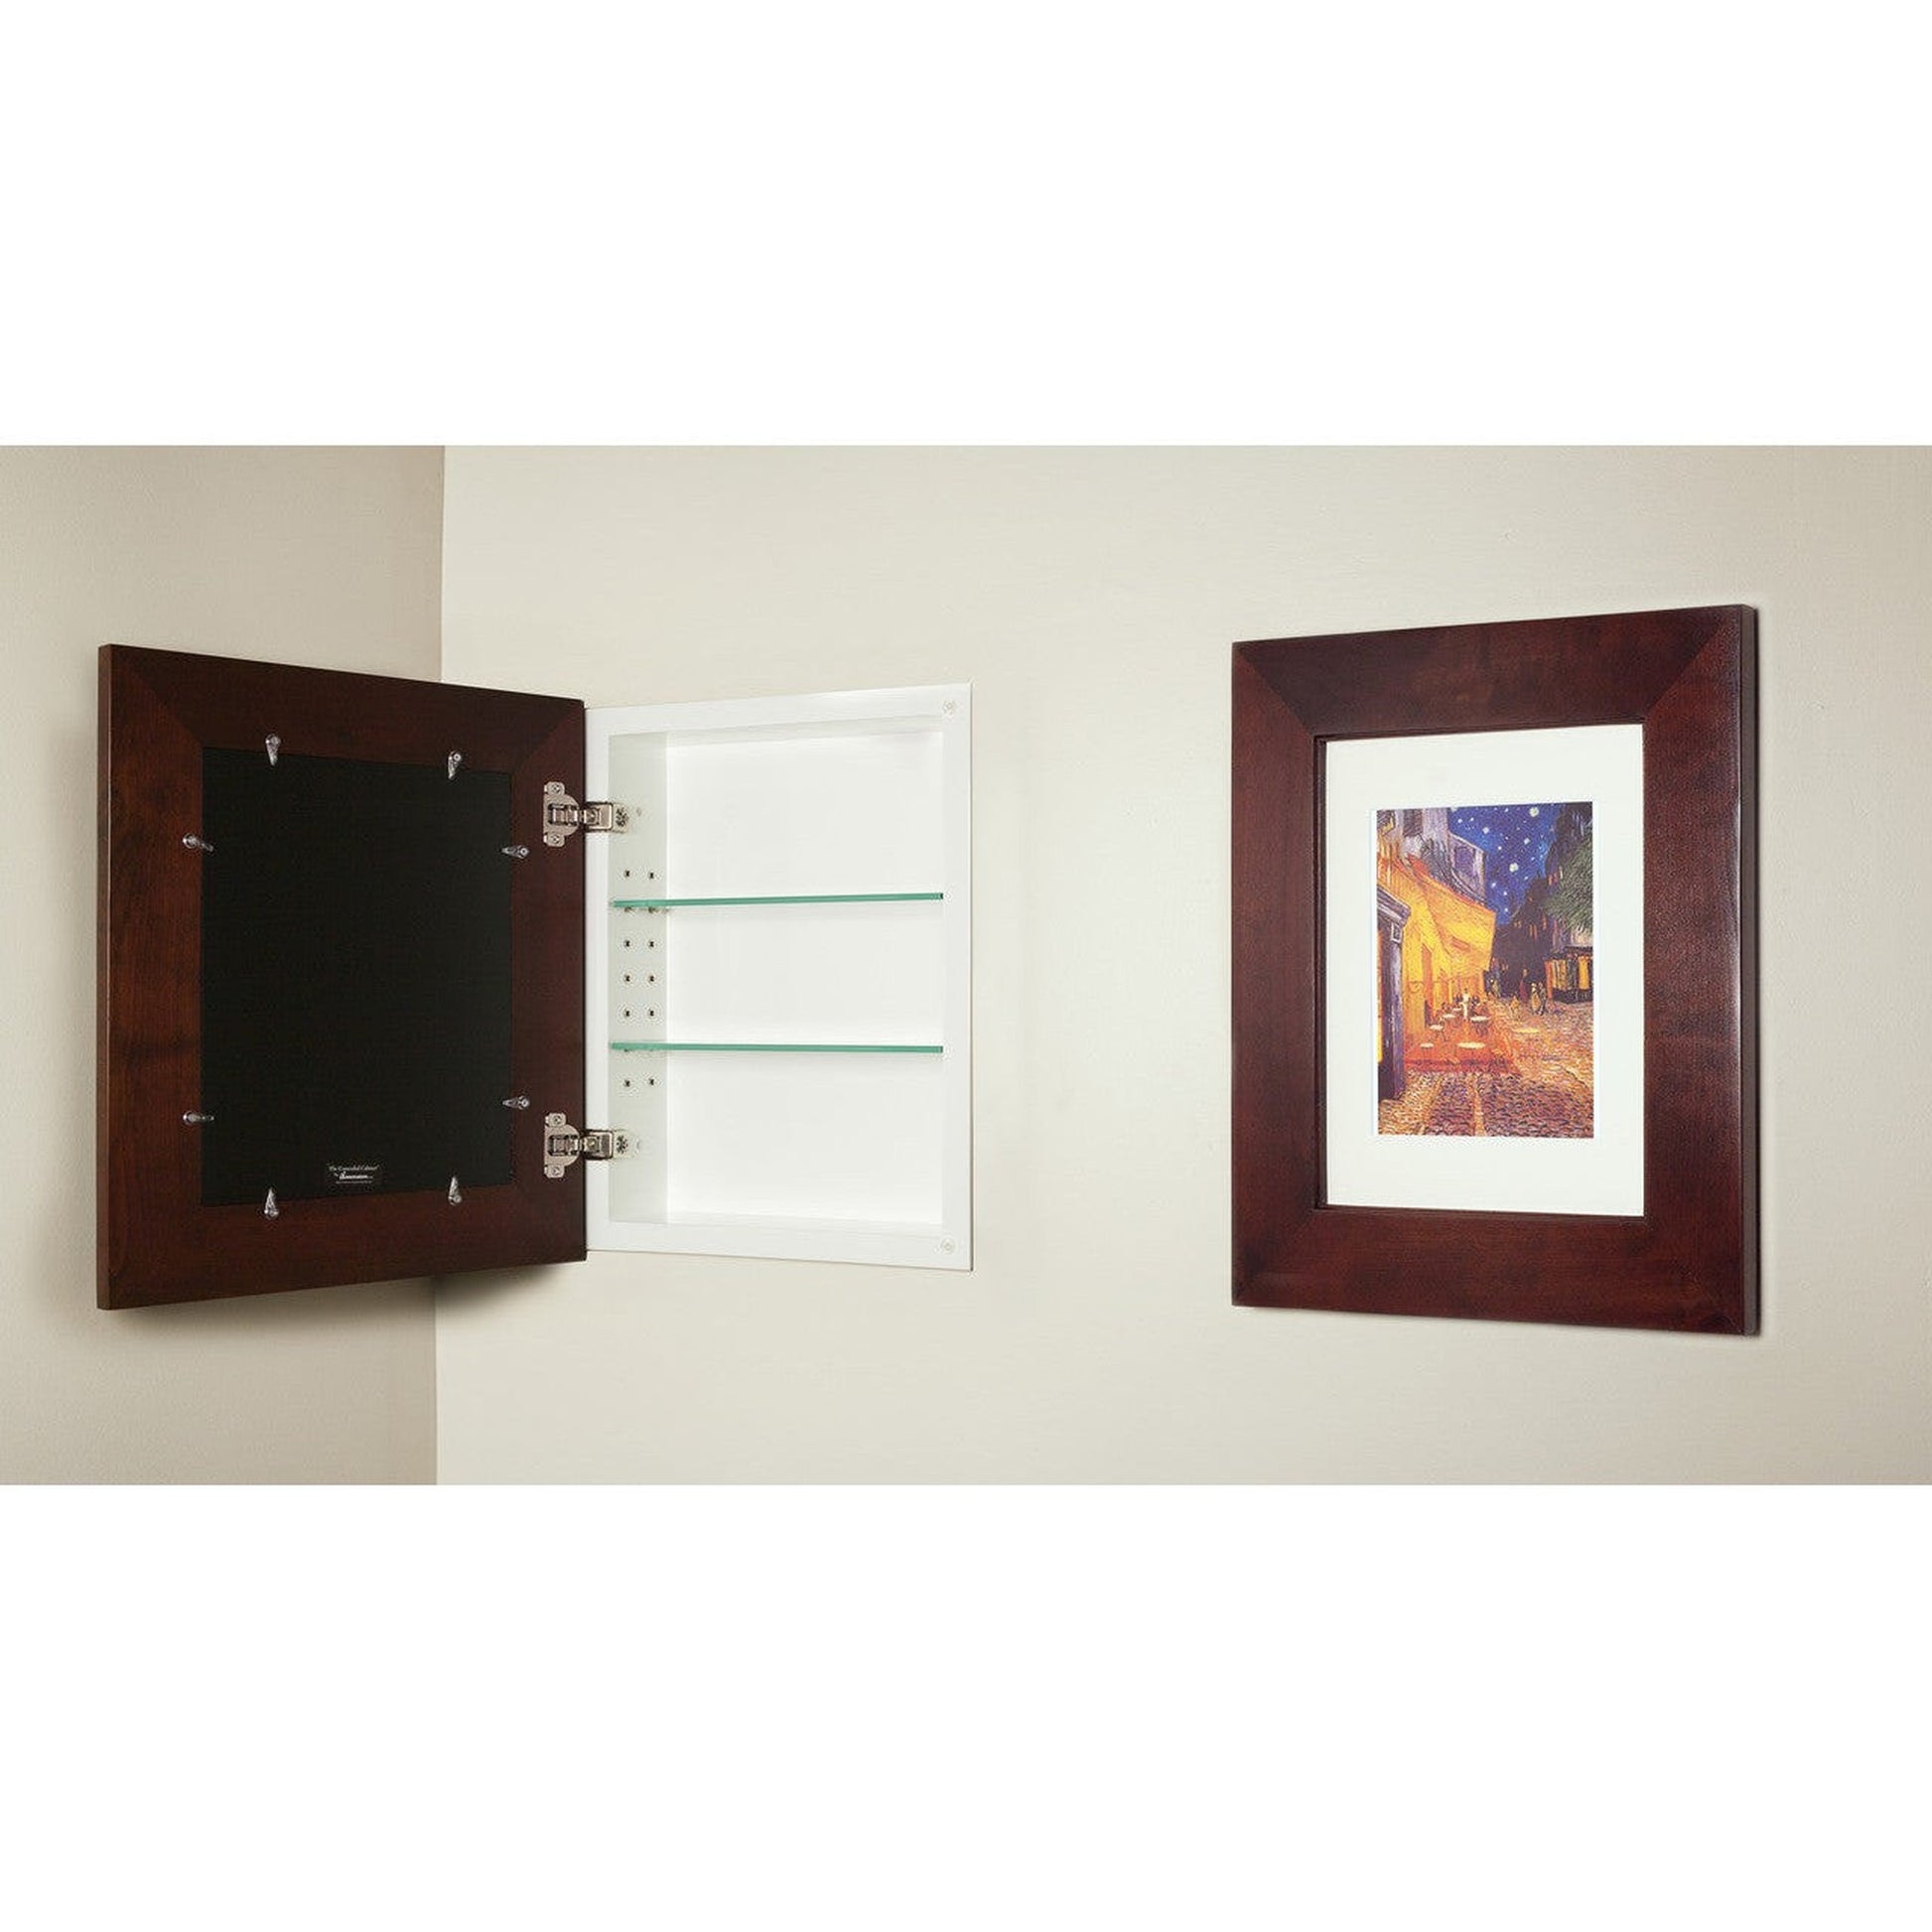 Fox Hollow Furnishings 14" x 18" Large Espresso Natural Interior Recessed Picture Frame Medicine Cabinet With Ivory Matting